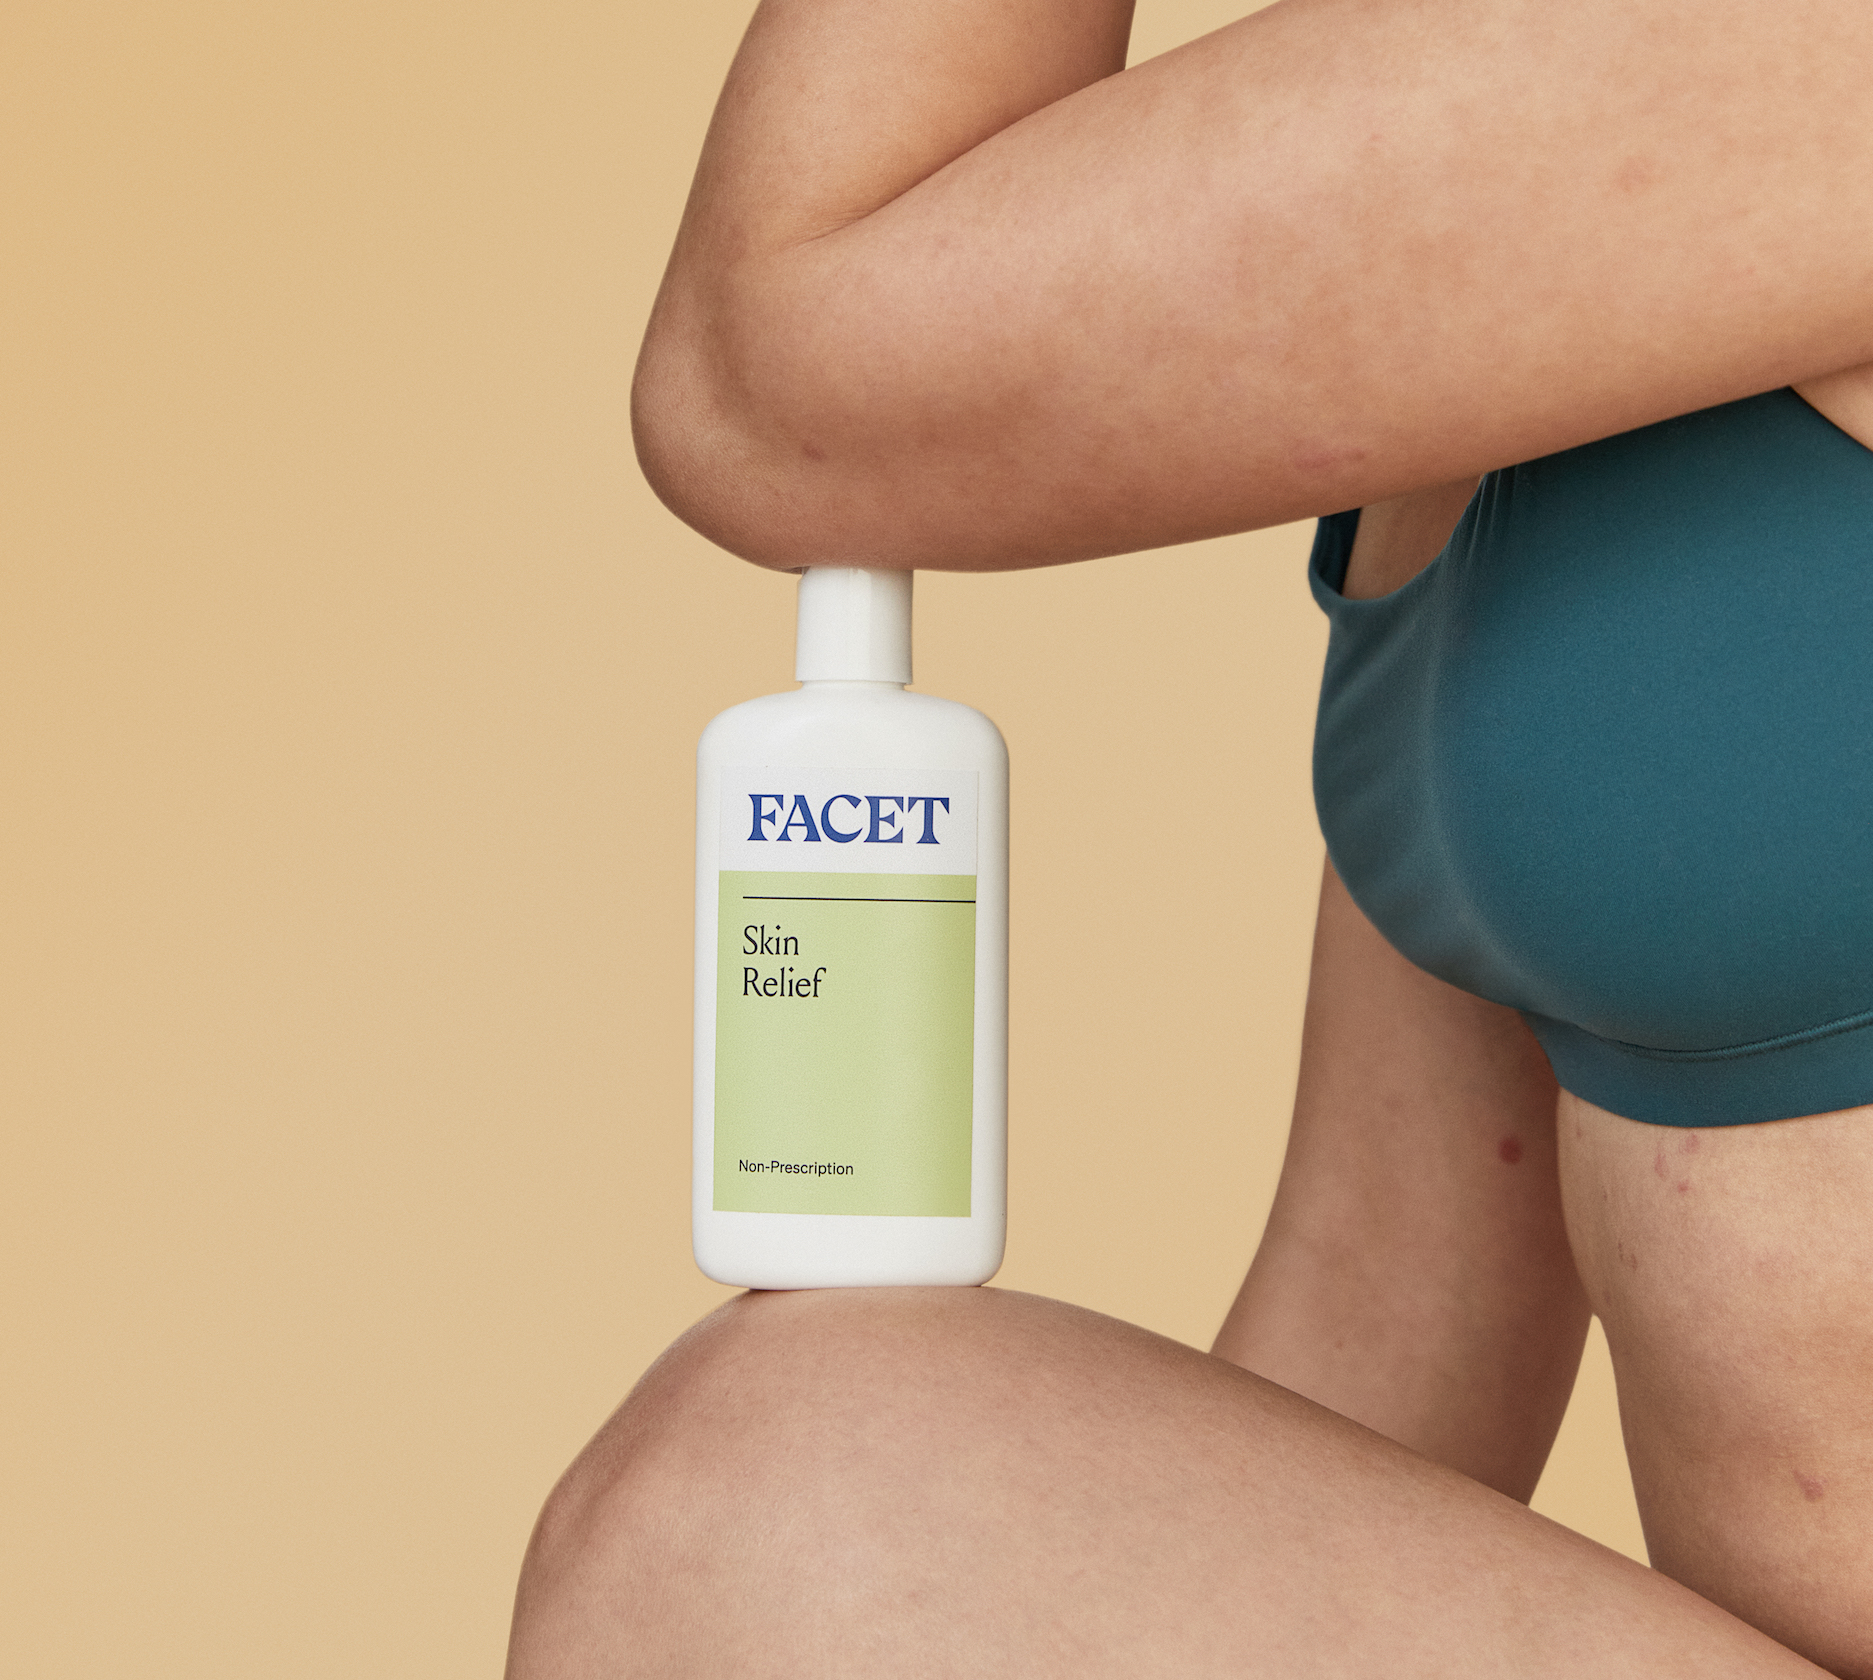 A photo of a person holding Facet Skin Relief.